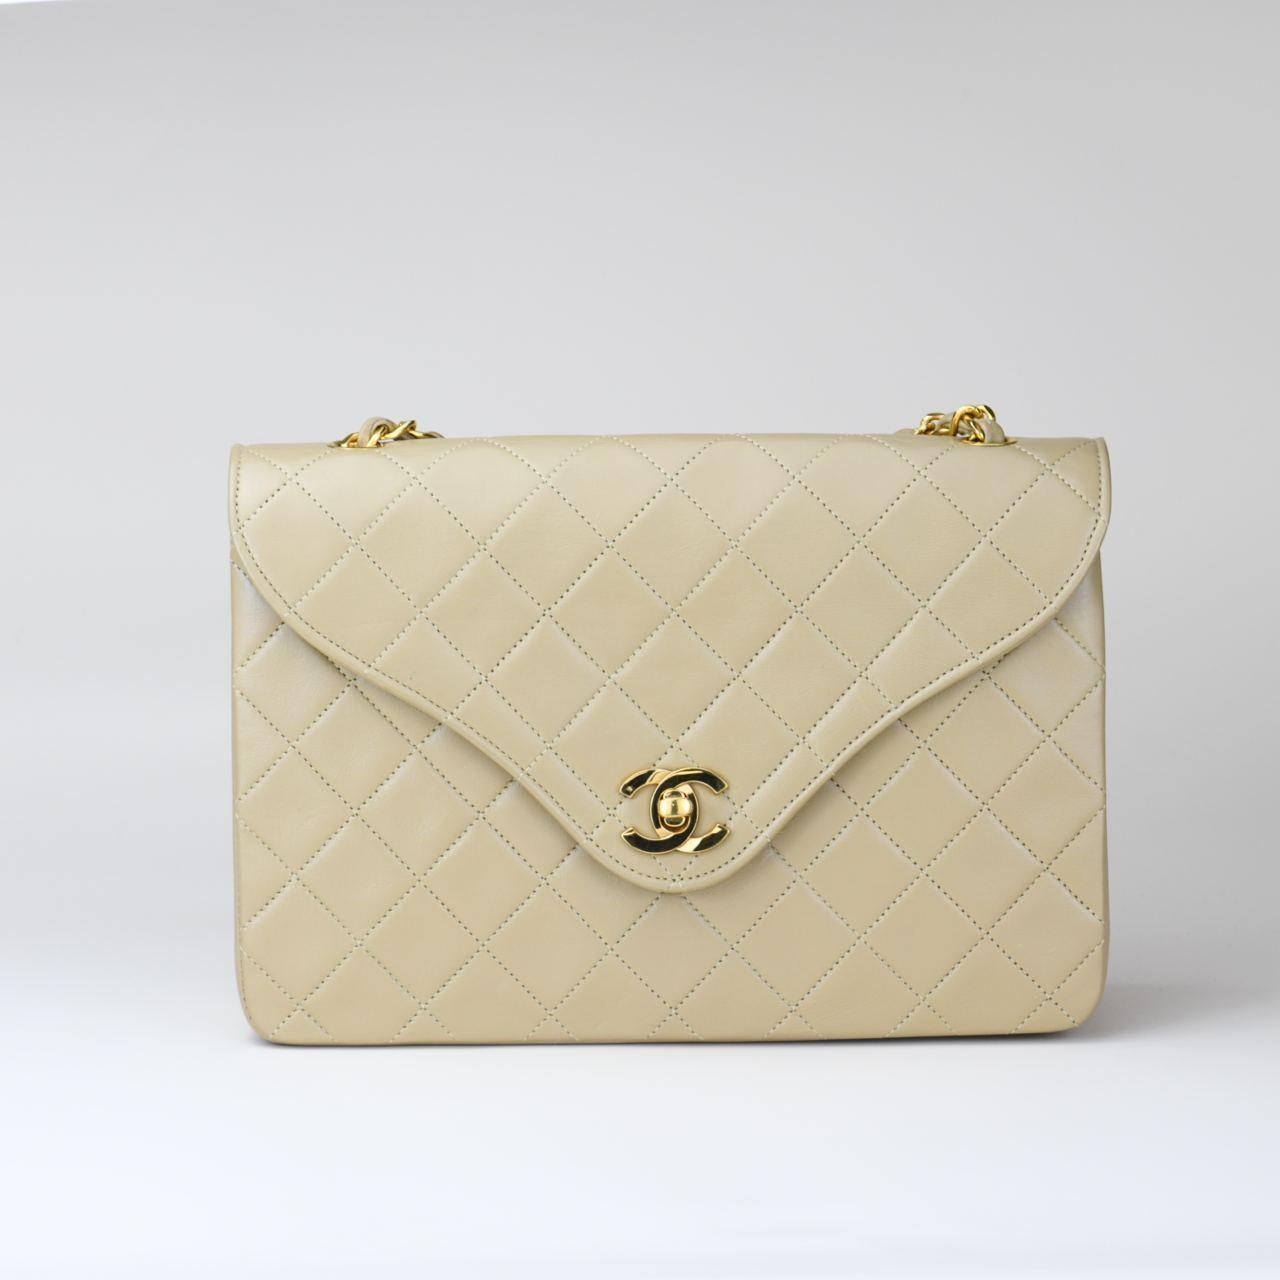 Chanel Vintage Beige Lambskin Single Flap Bag In Excellent Condition For Sale In Banbury, GB